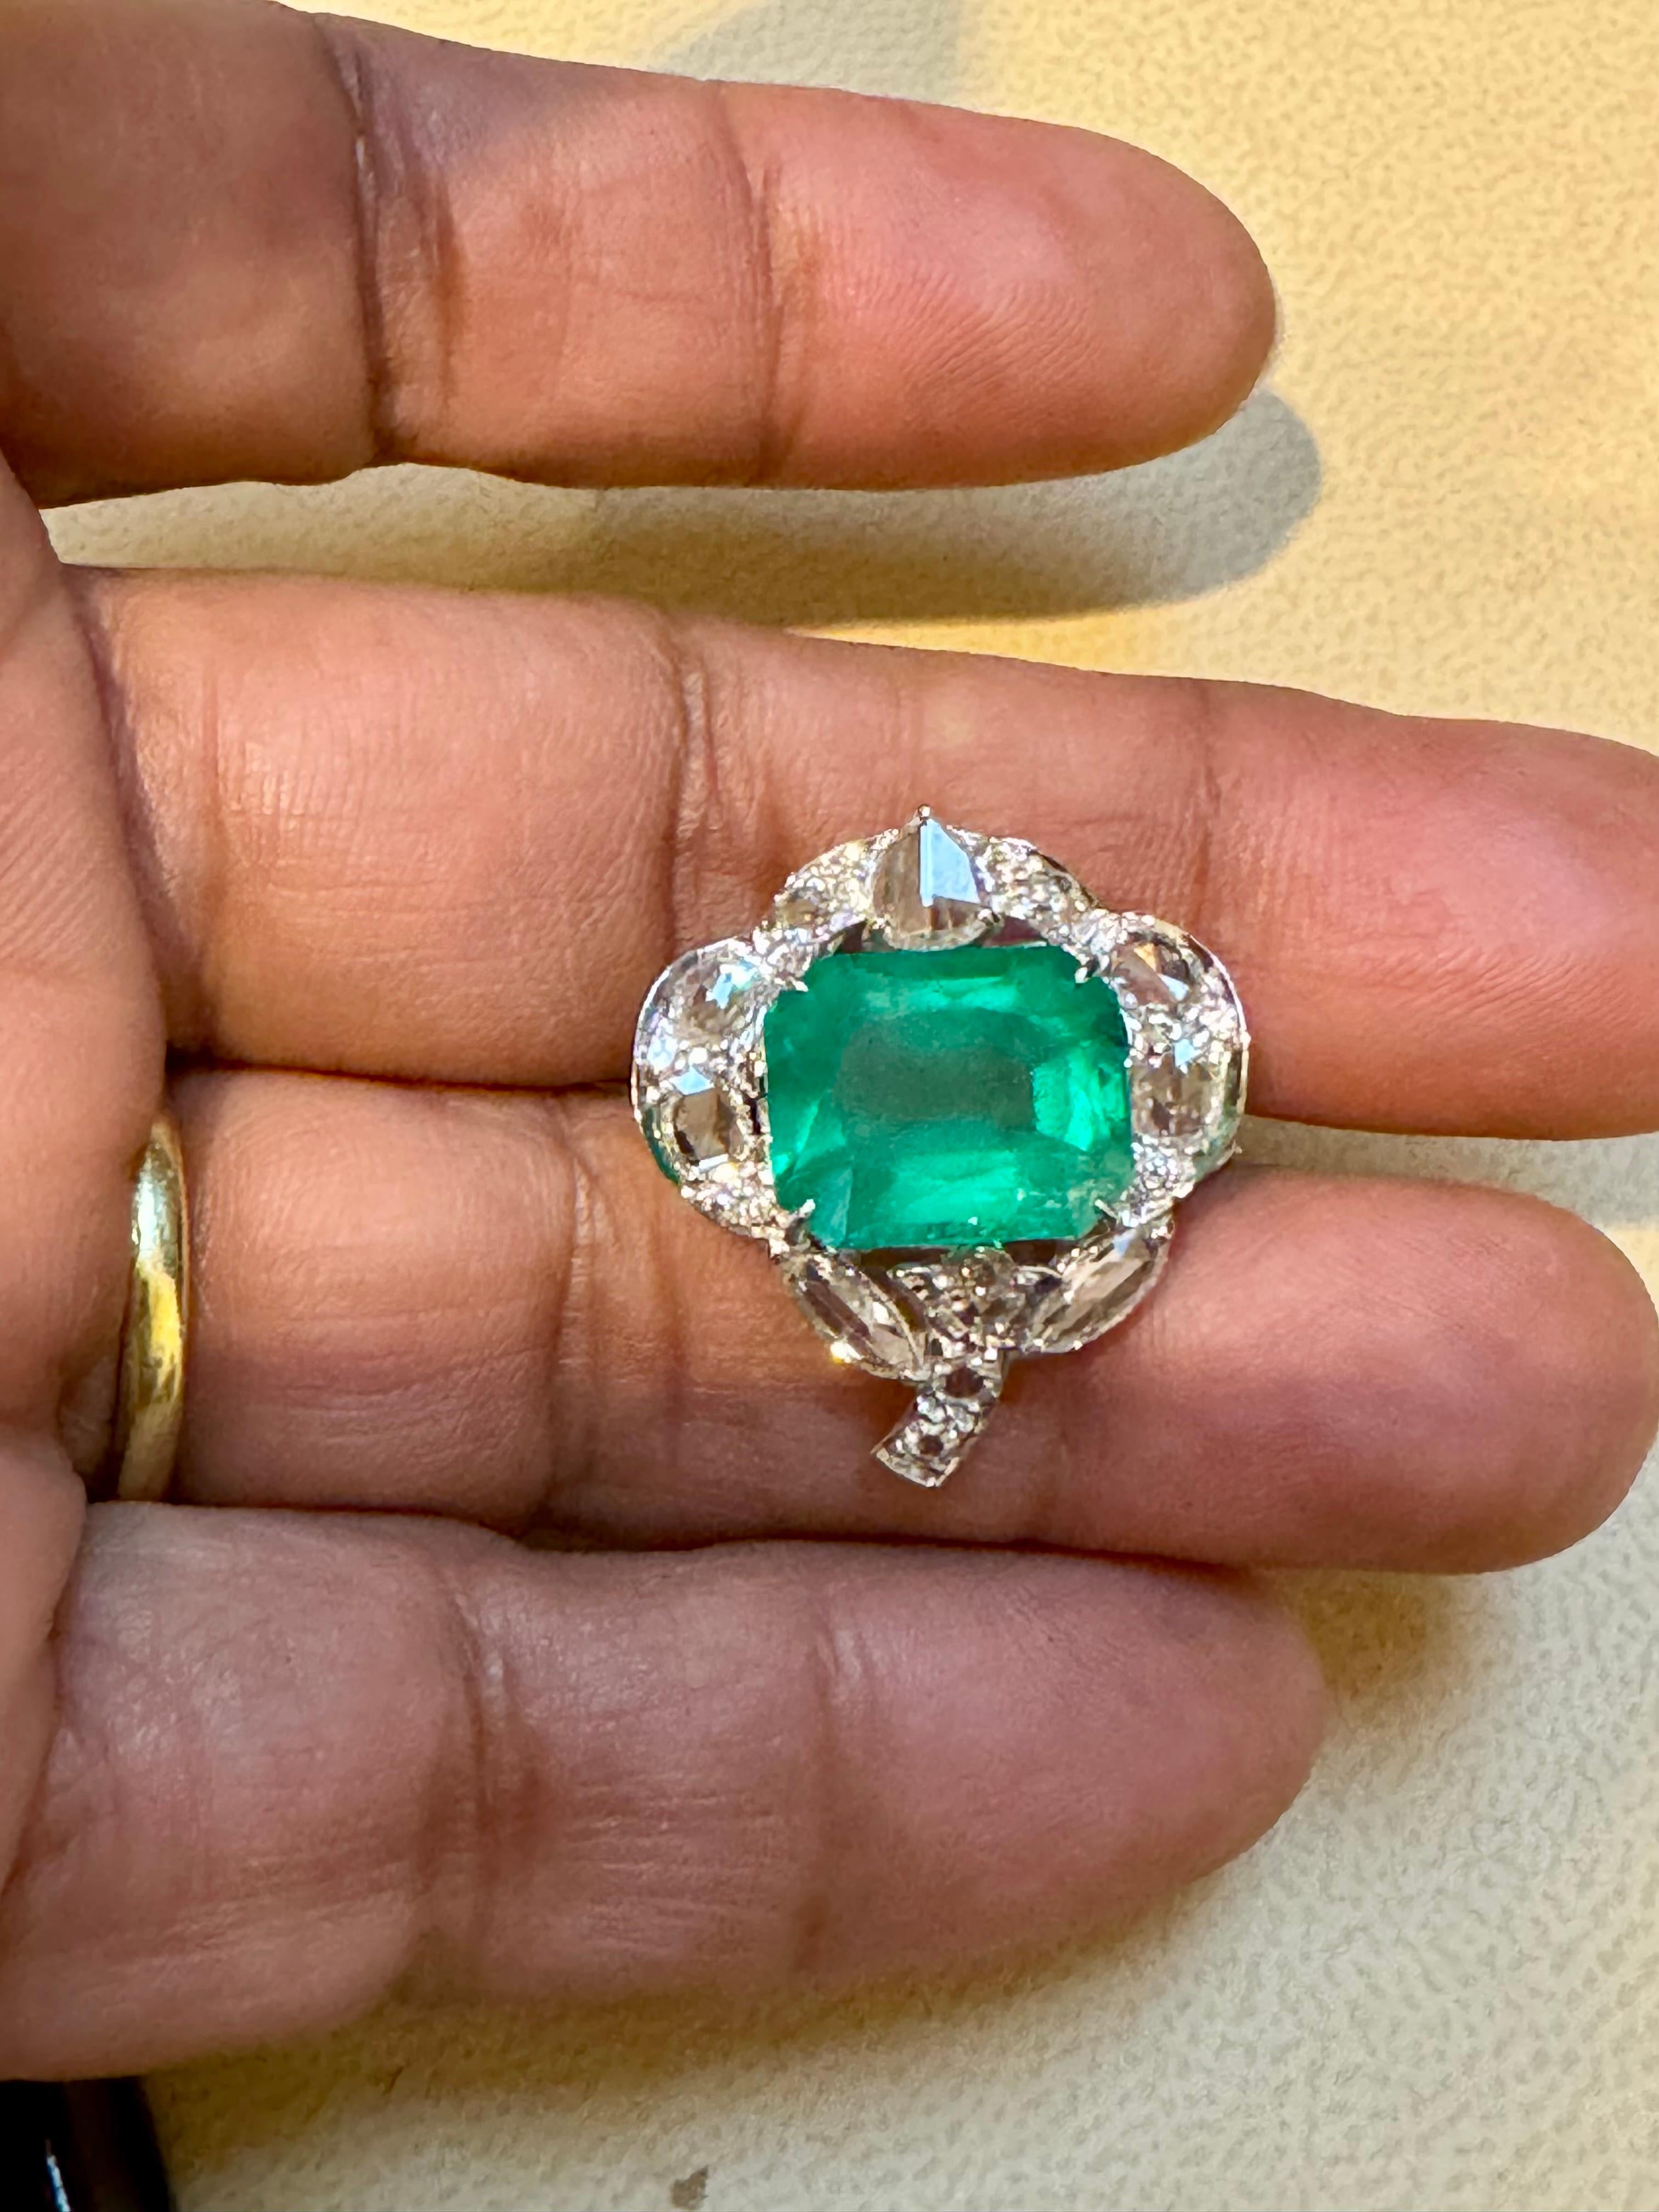 7 Ct Finest Zambian Emerald Cut Emerald & 1.5Ct Diamond Ring, 18 Kt Gold Size 9 In Excellent Condition For Sale In New York, NY